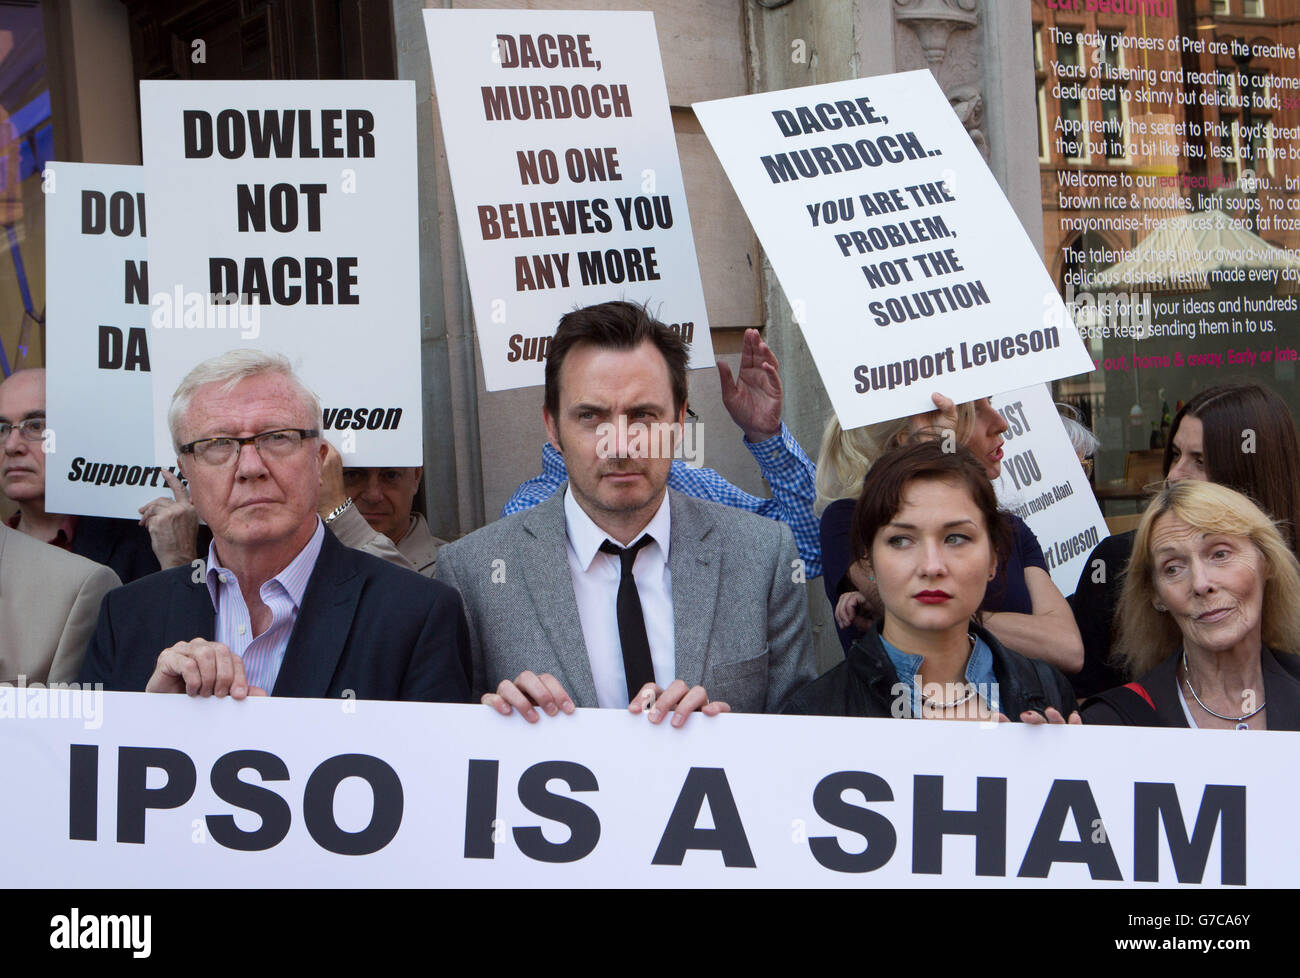 Hacked Off campaigners hold banners in a protest to oppose the new regulator IPSO and deliver an open letter to its chairman Sir Alan Moses, in the OCC HQ in Holborn where IPSO is based. Stock Photo